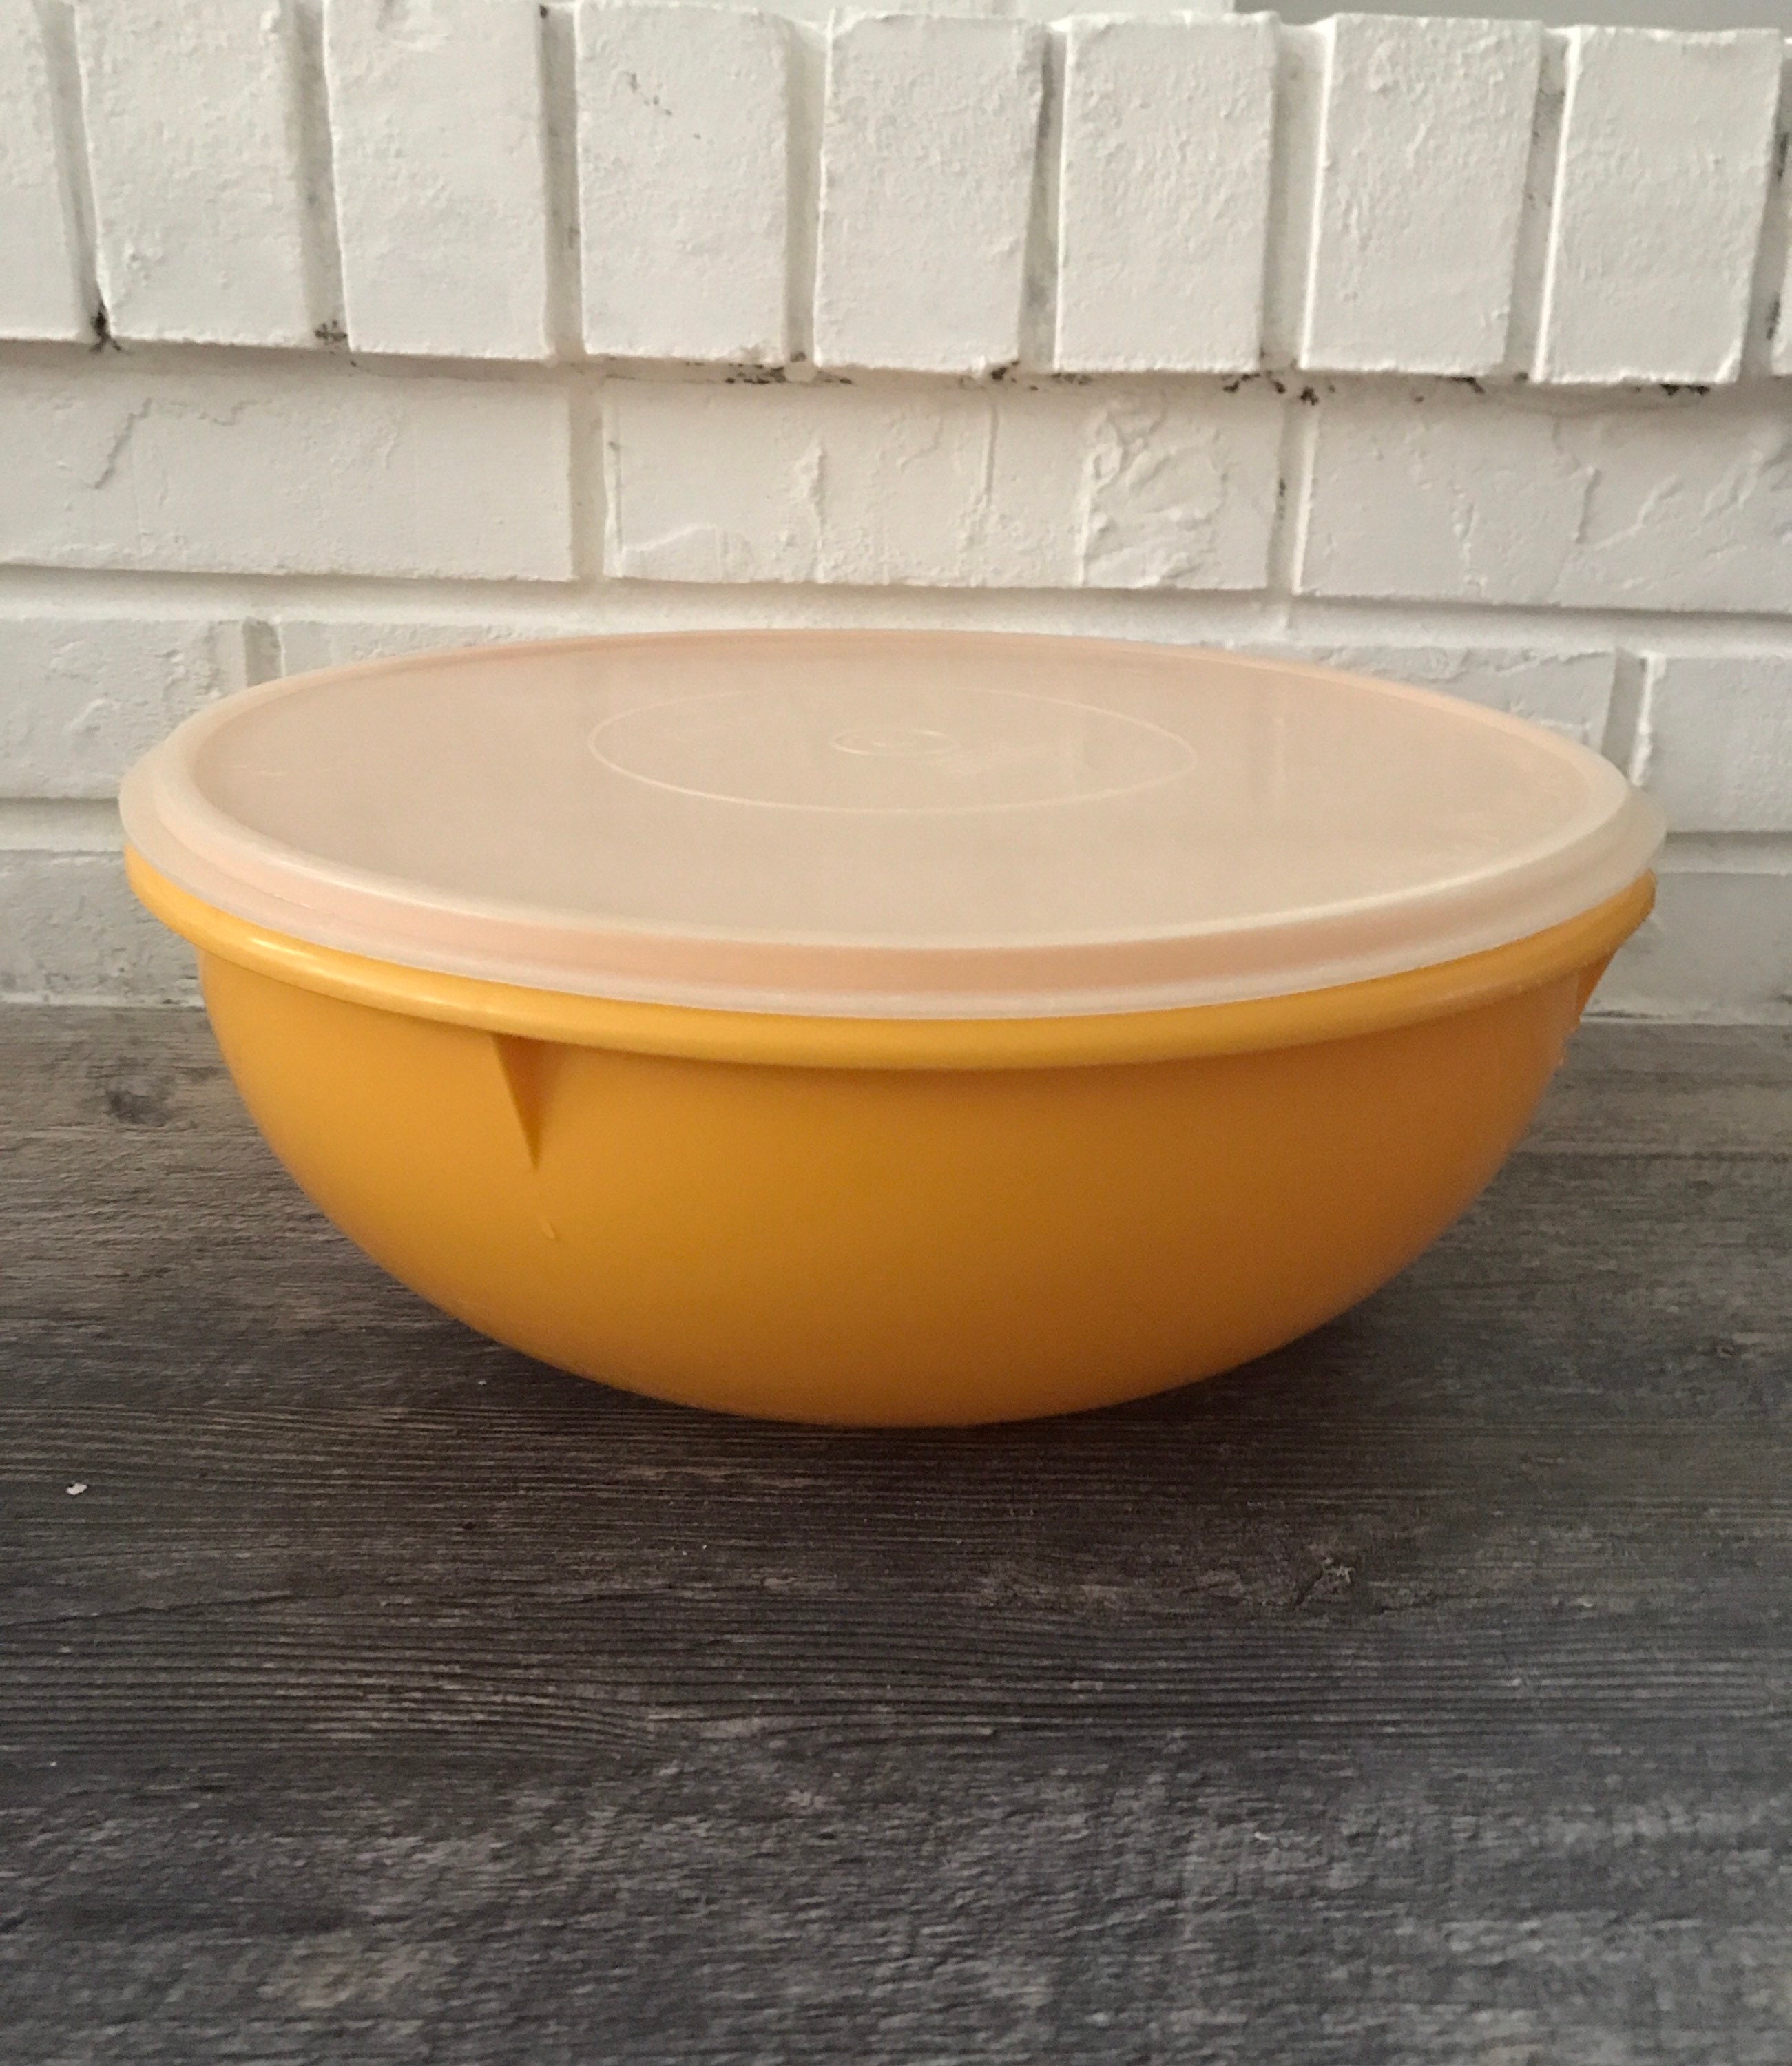 New Thatsa Mixing Bowl With same color Seal 32 Cup (7.8L)